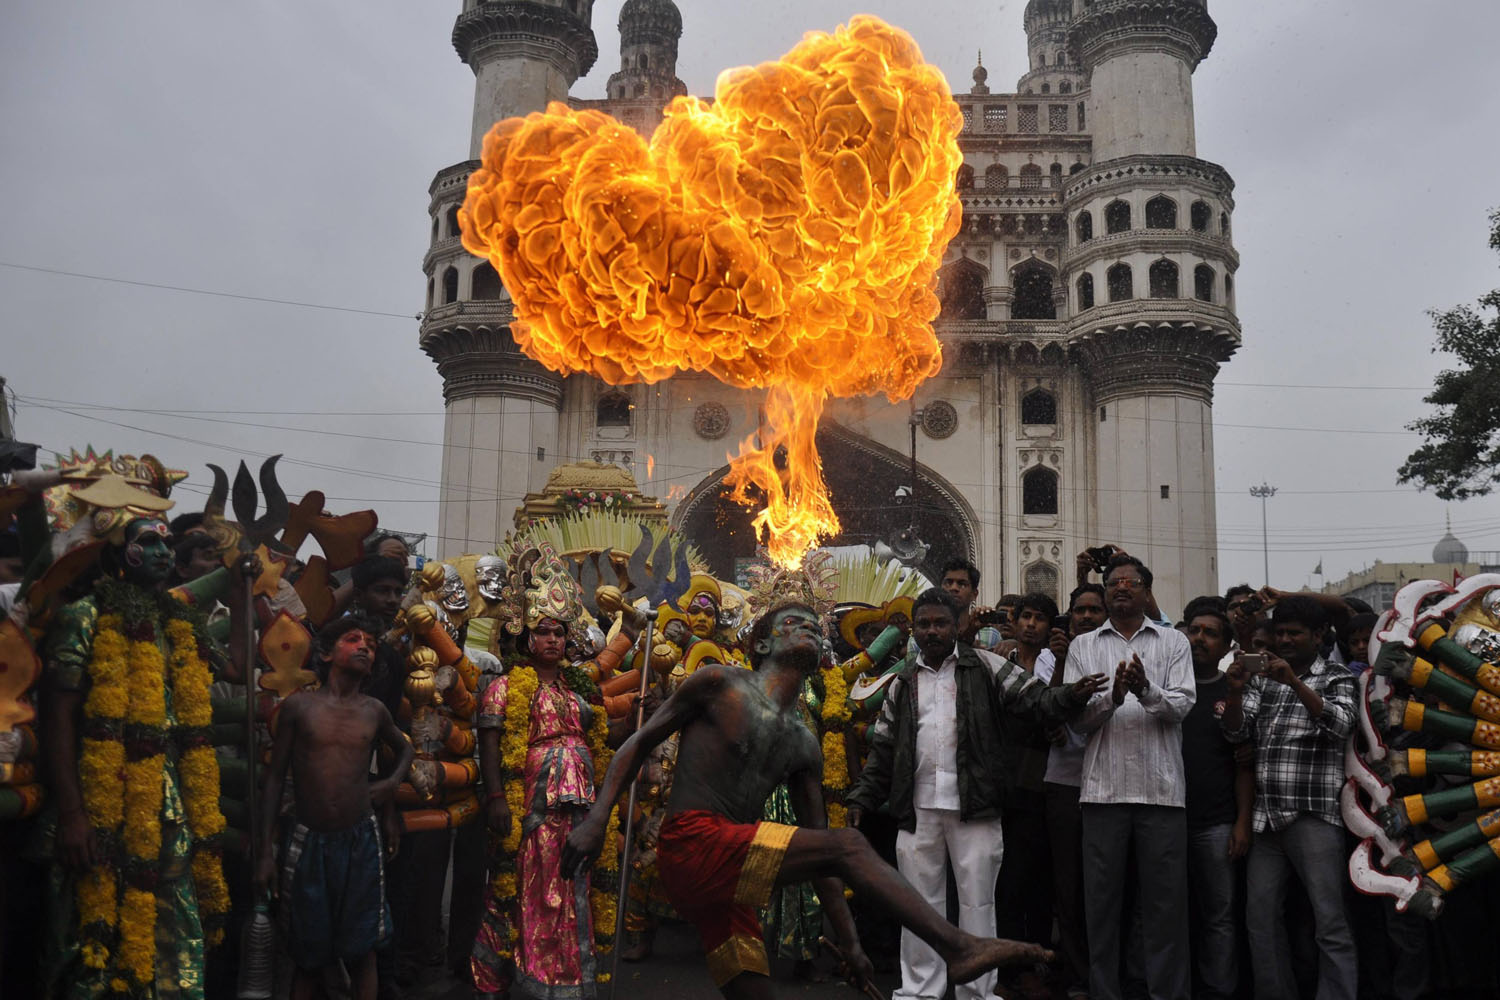 A performer blows fire from his mouth as he performs in front of the historical monument Charminar during the annual Hindu religious festival of Bonalu in Hyderabad